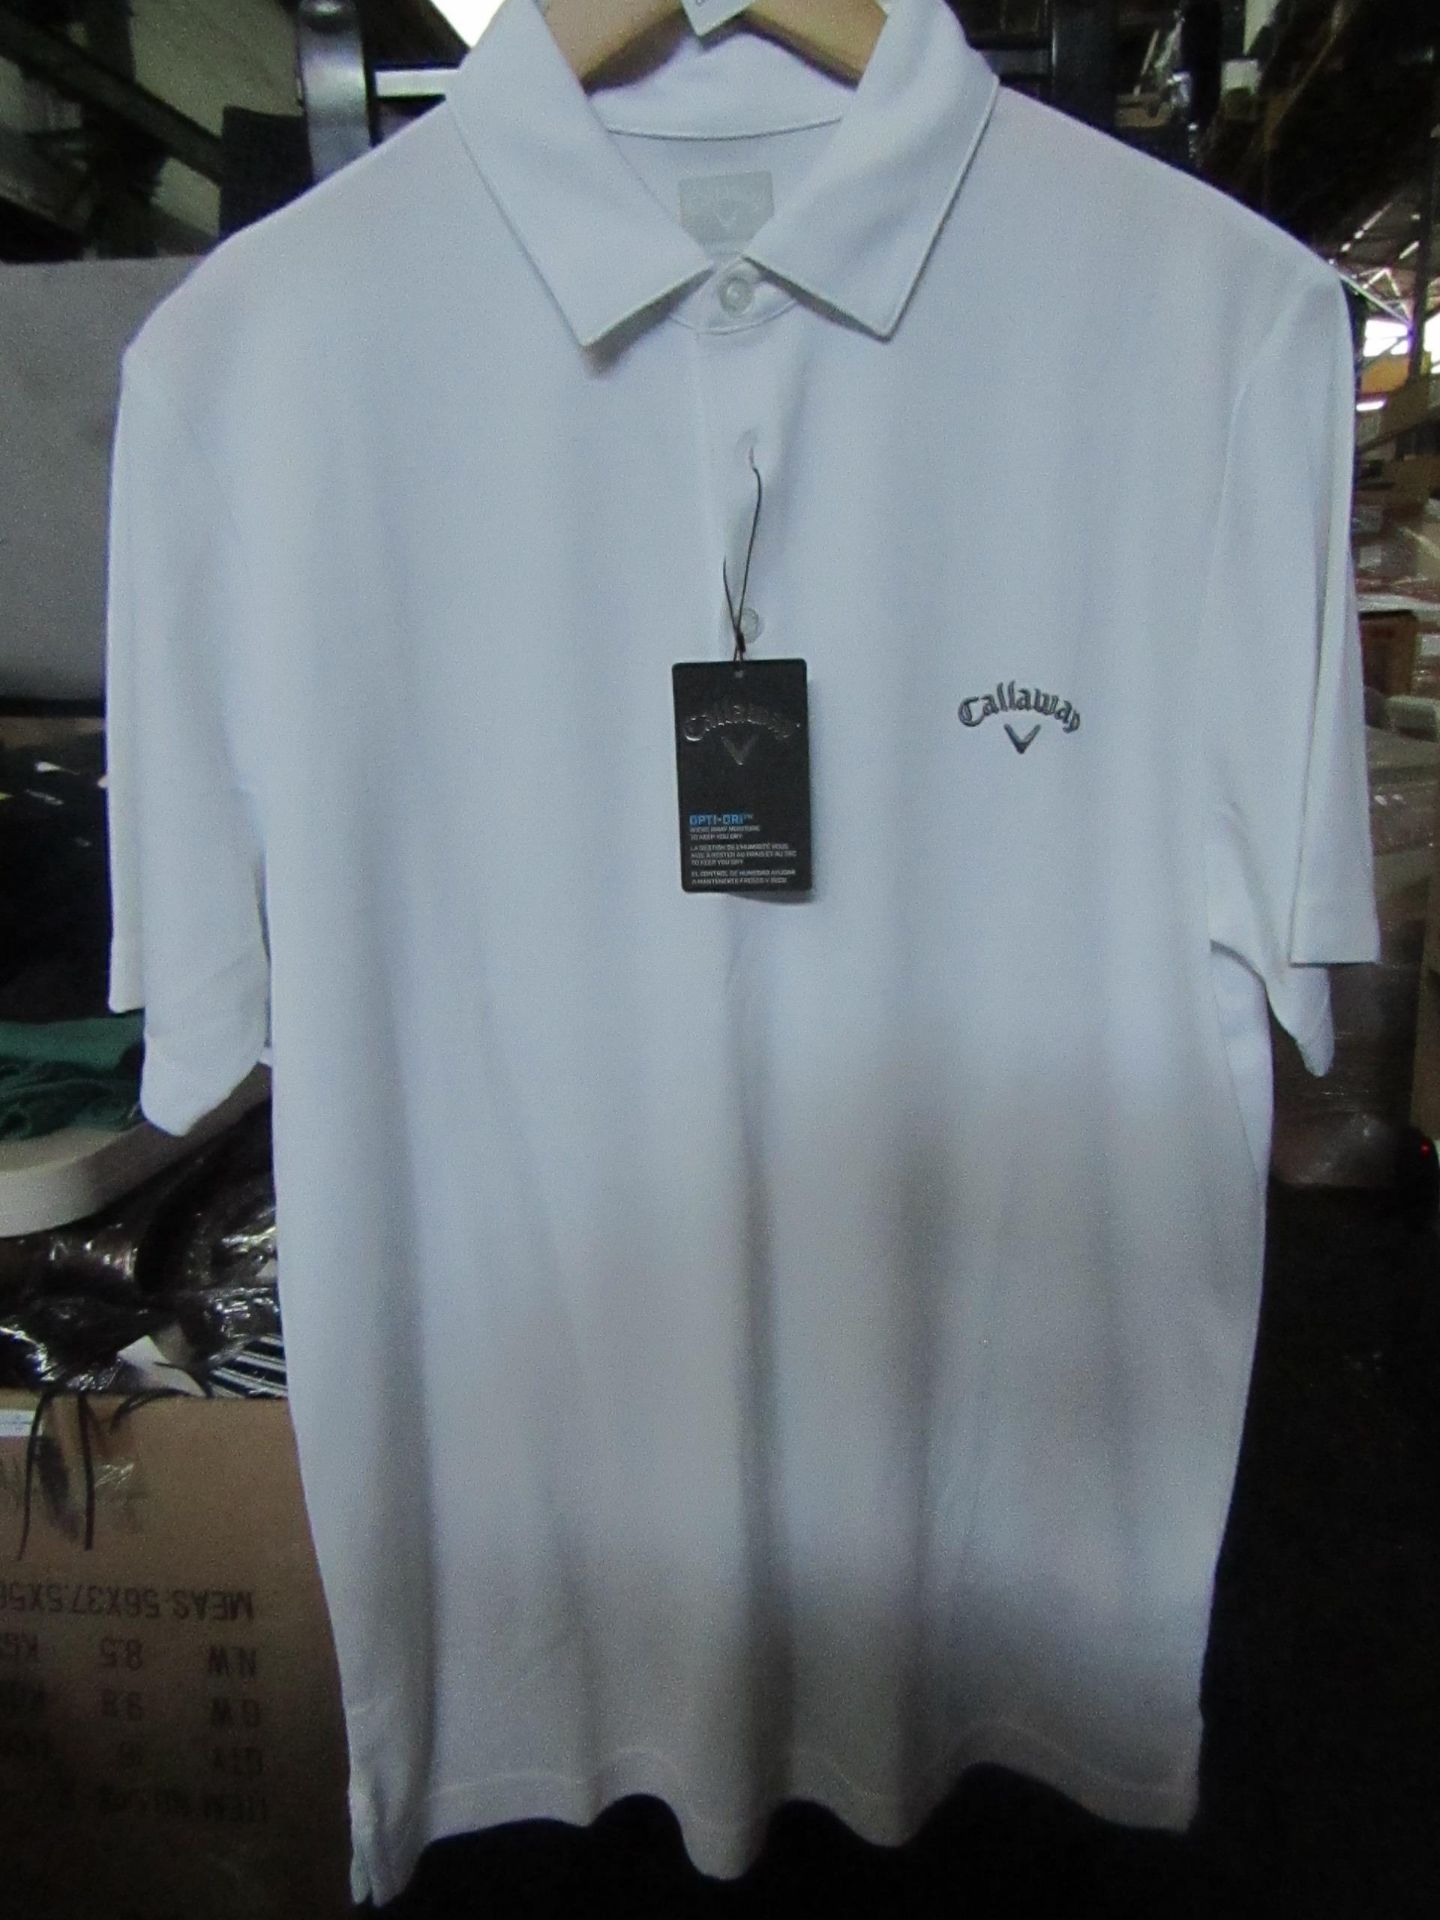 Callaway Golf Polo Shirt, new with tag, size medium